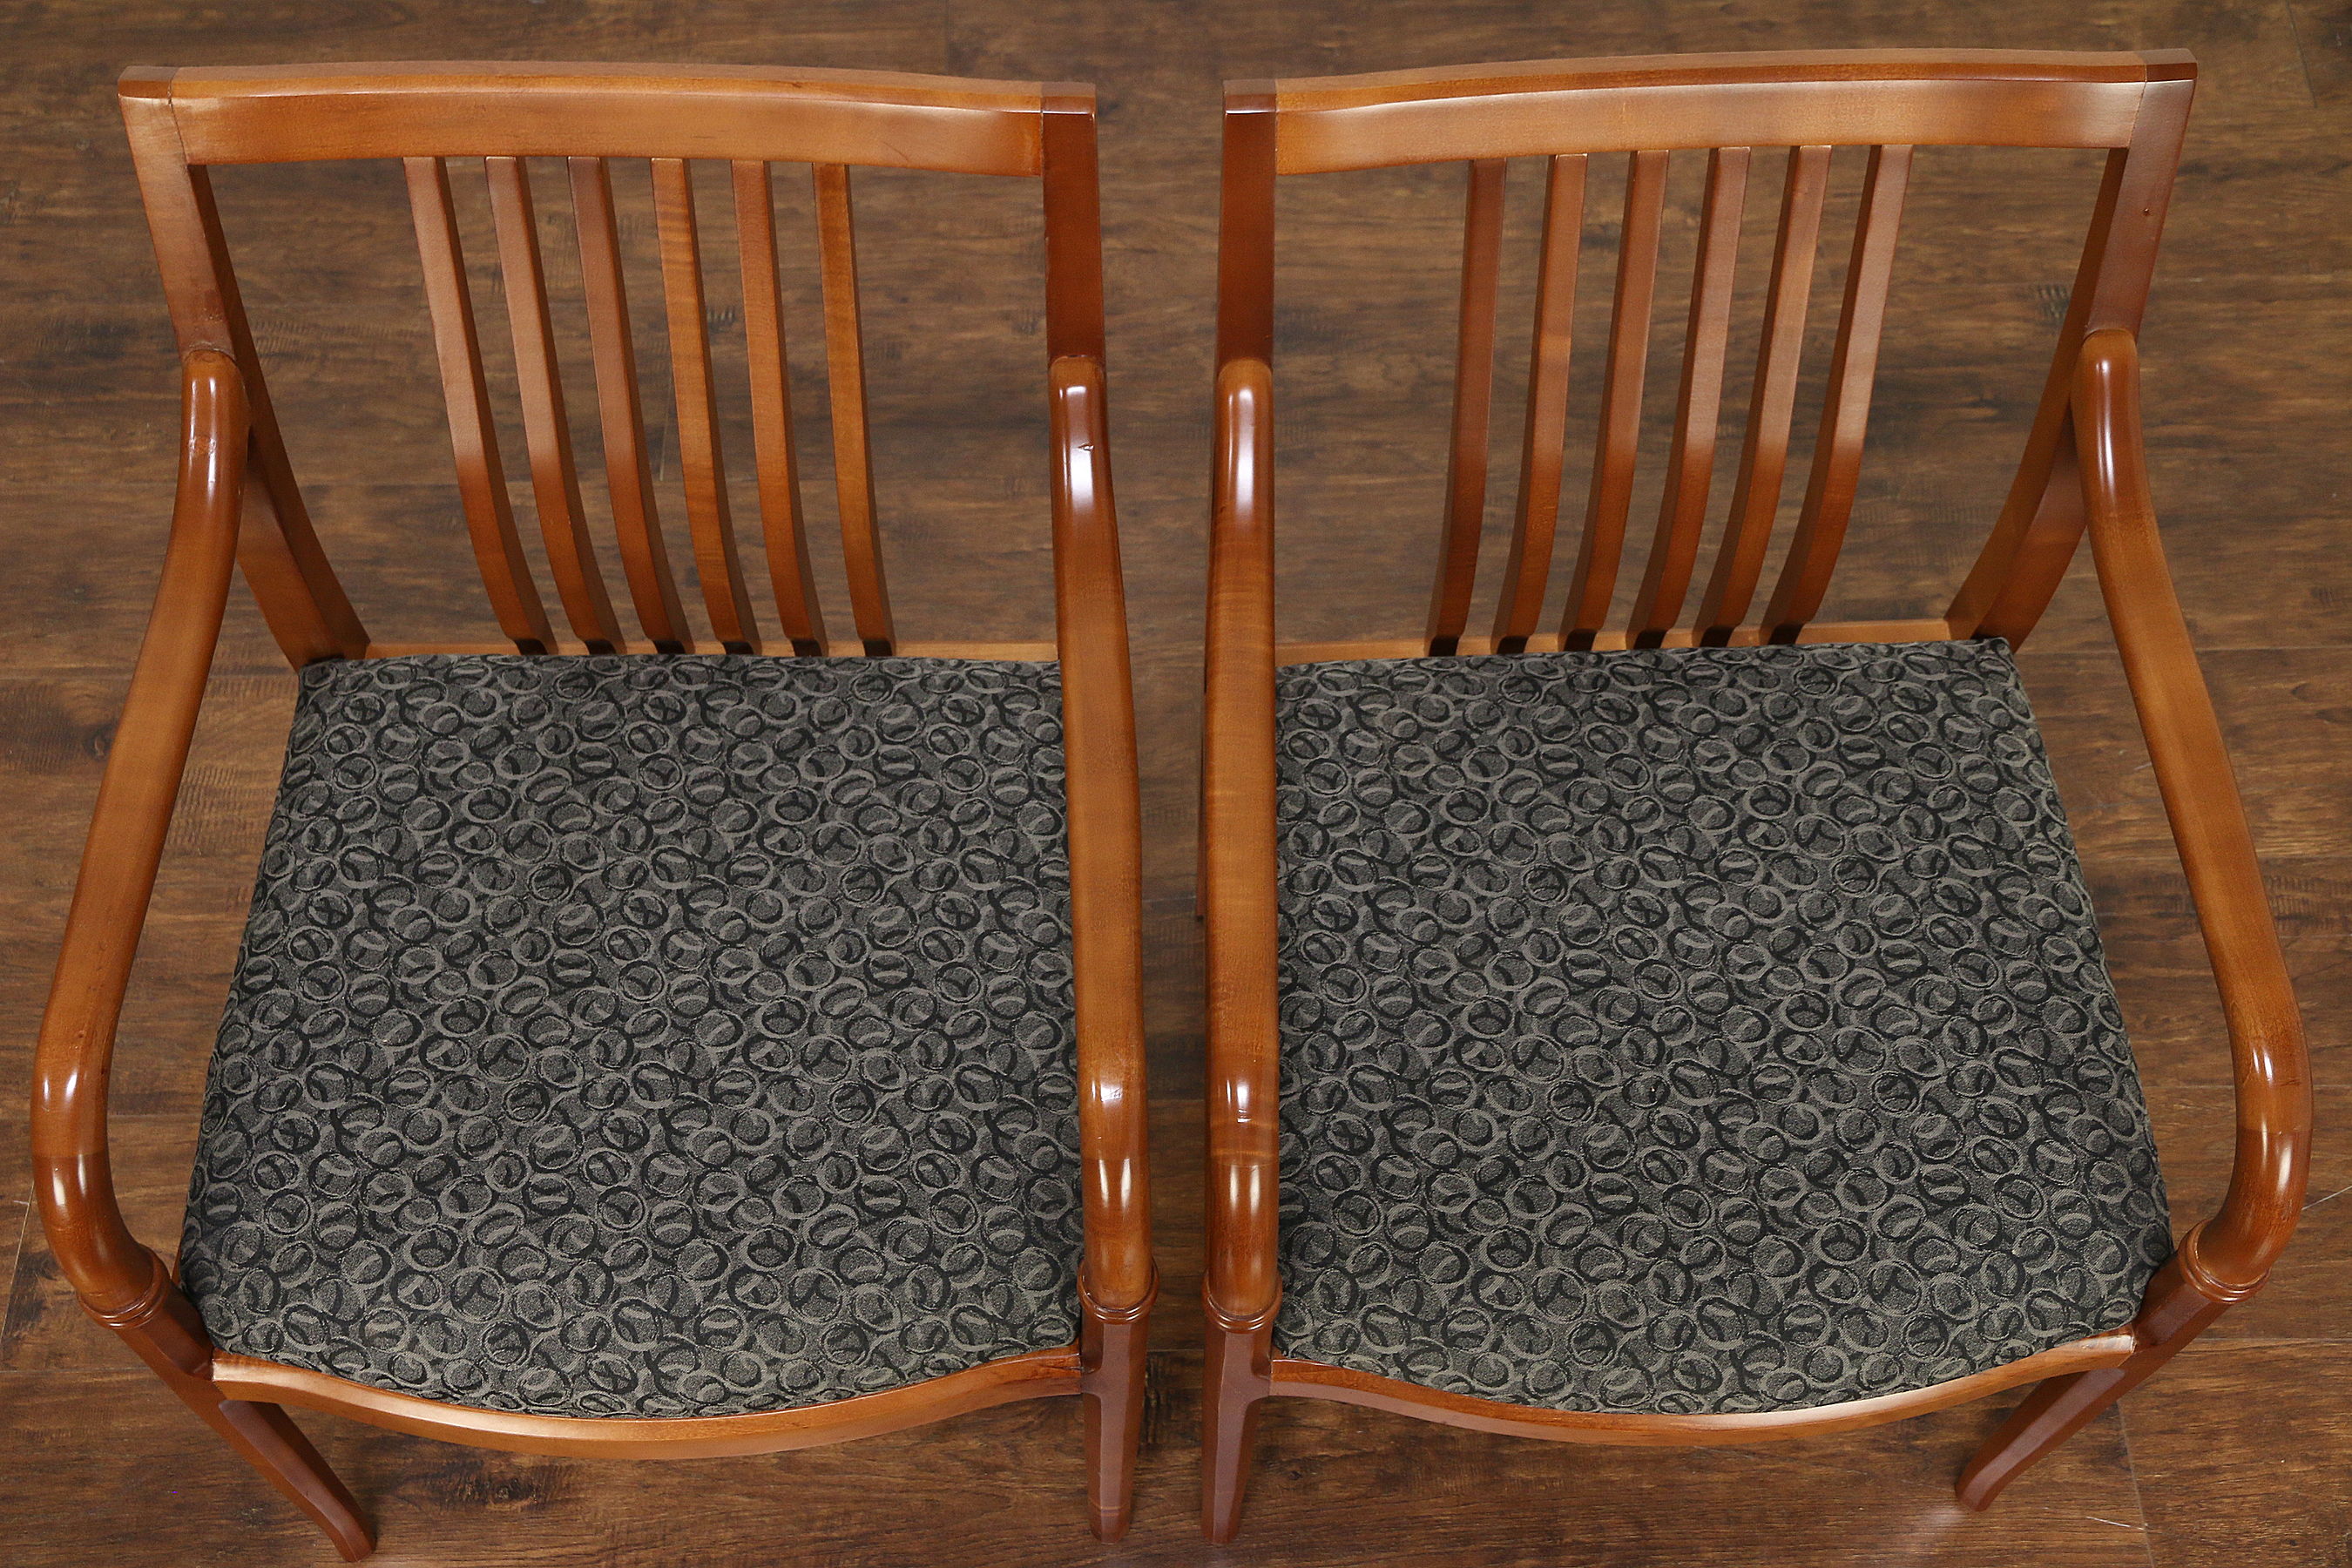 Sold Pair Of Cherry Finish Vintage Library Or Office Chairs